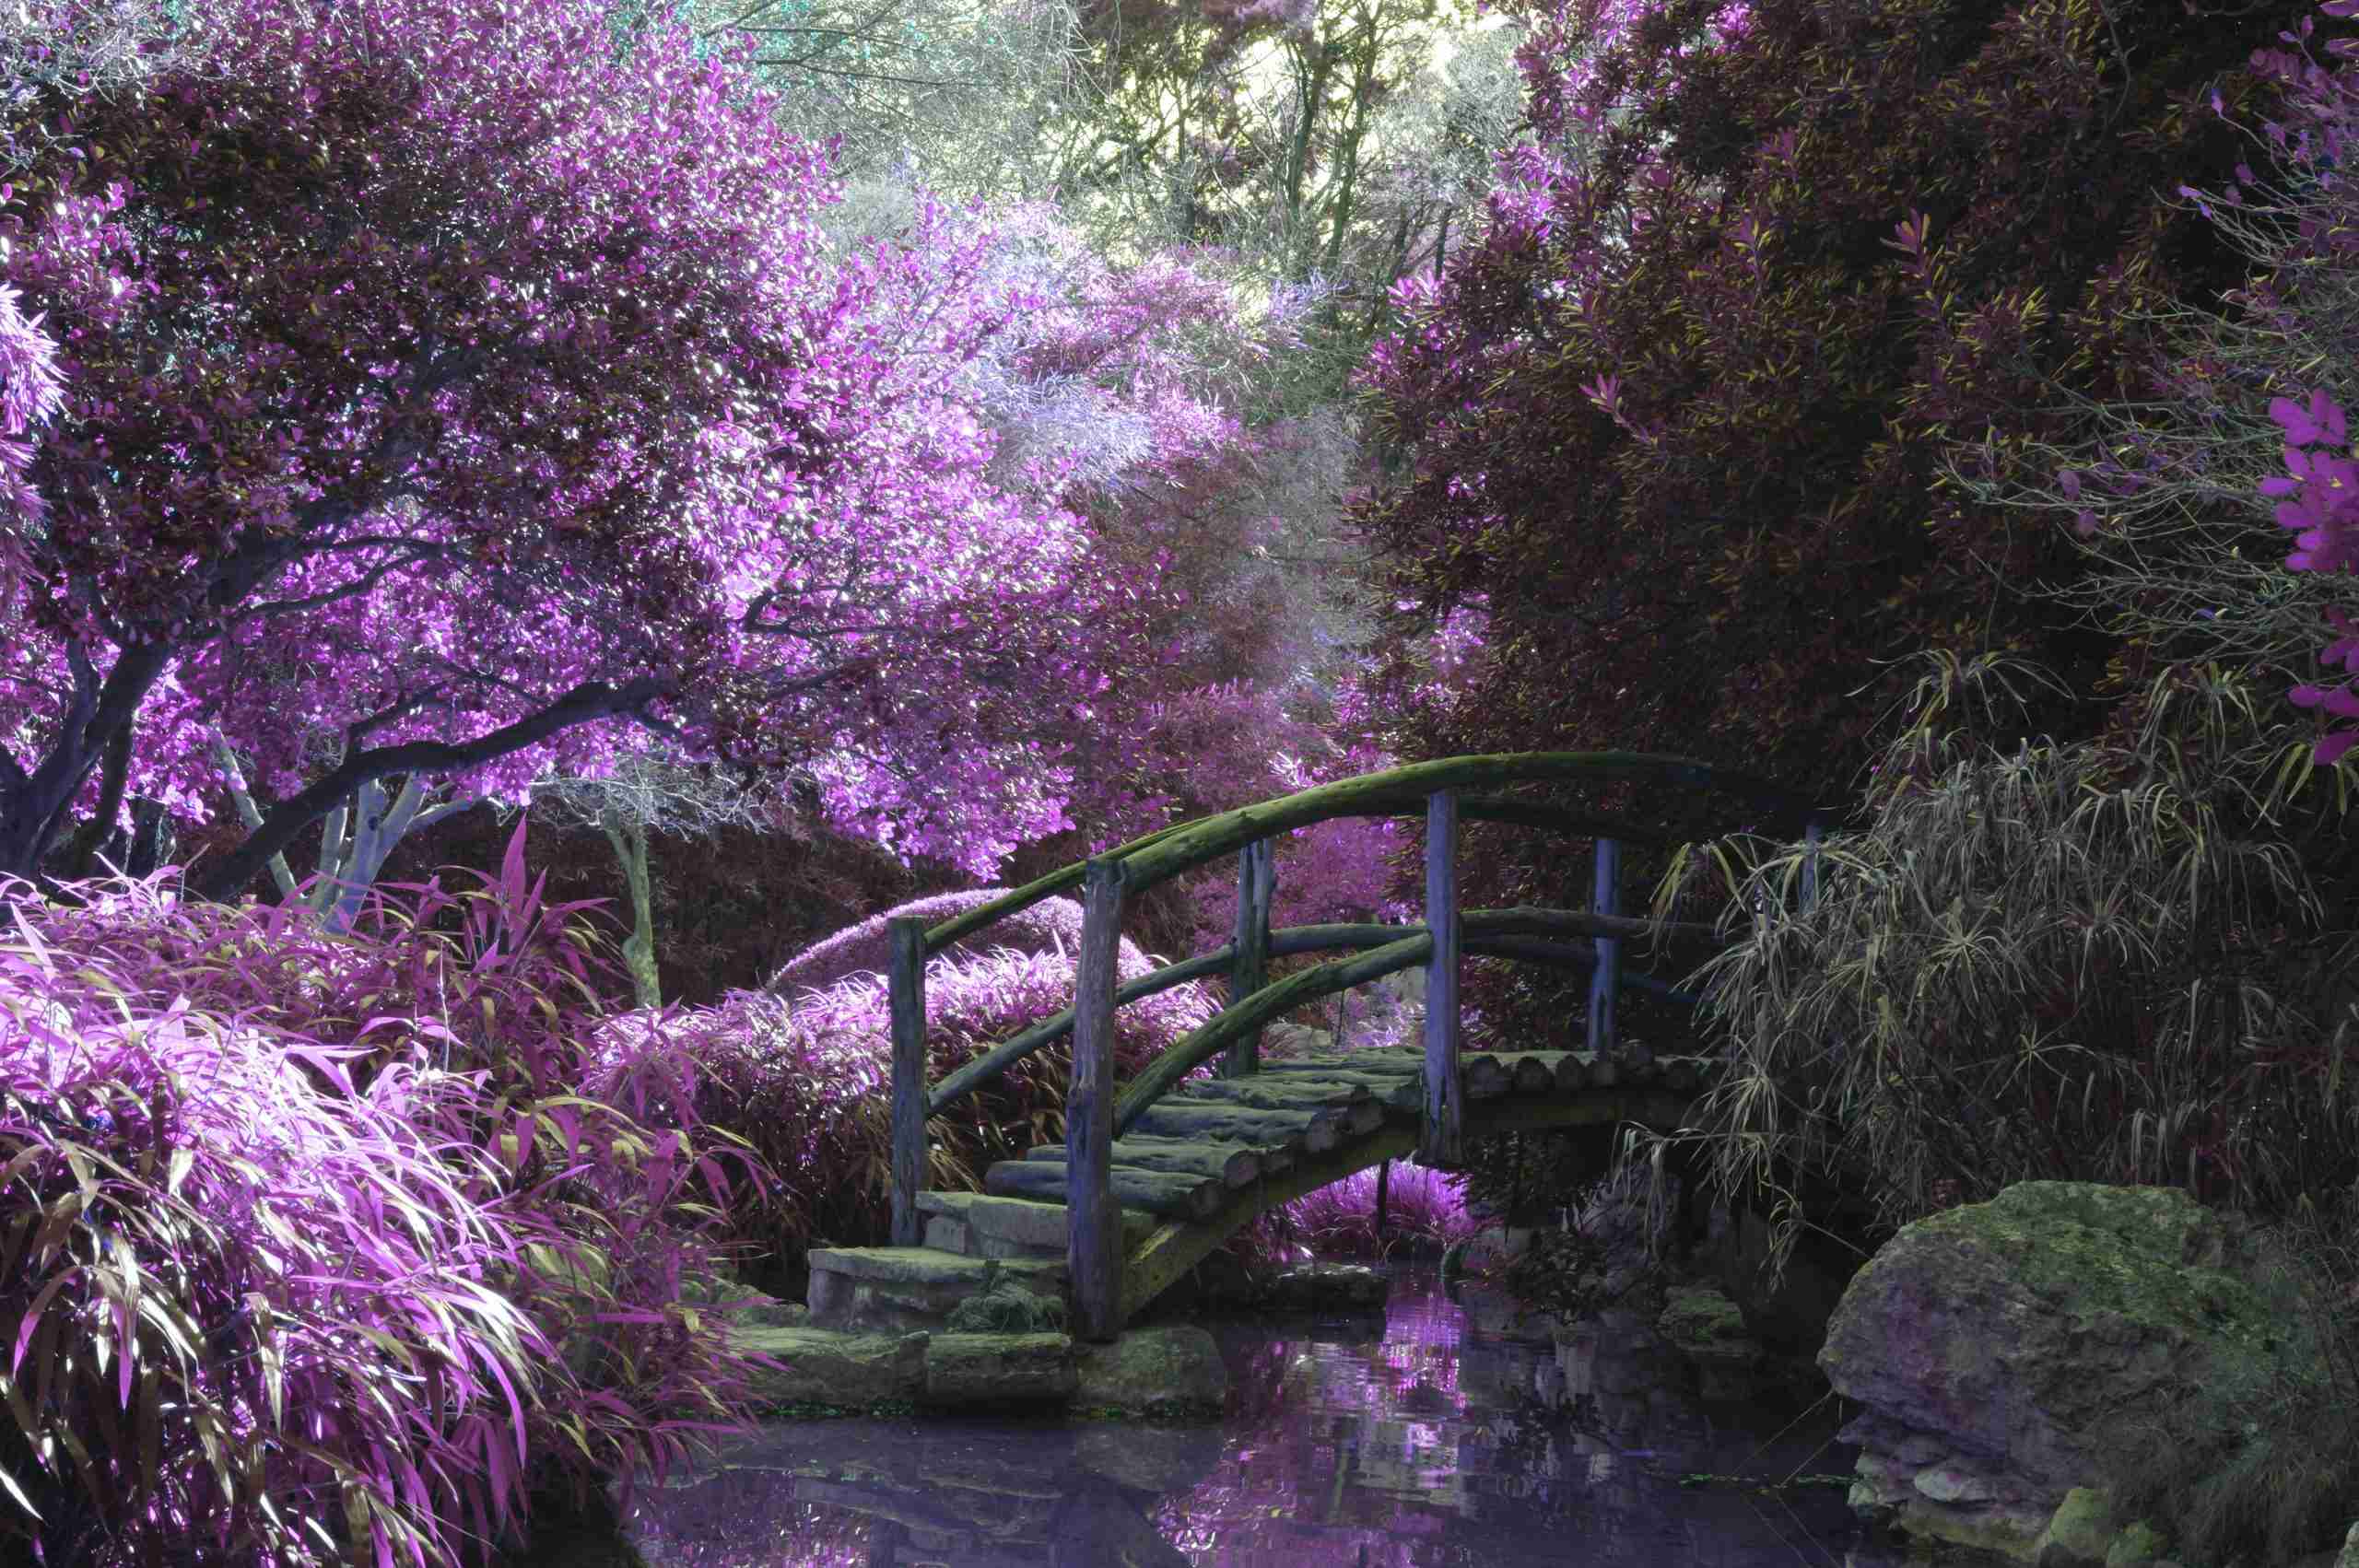 A serene, mystical garden with a wooden arched bridge over a gentle stream, surrounded by lush foliage in various shades of purple, invoking a dreamlike atmosphere.